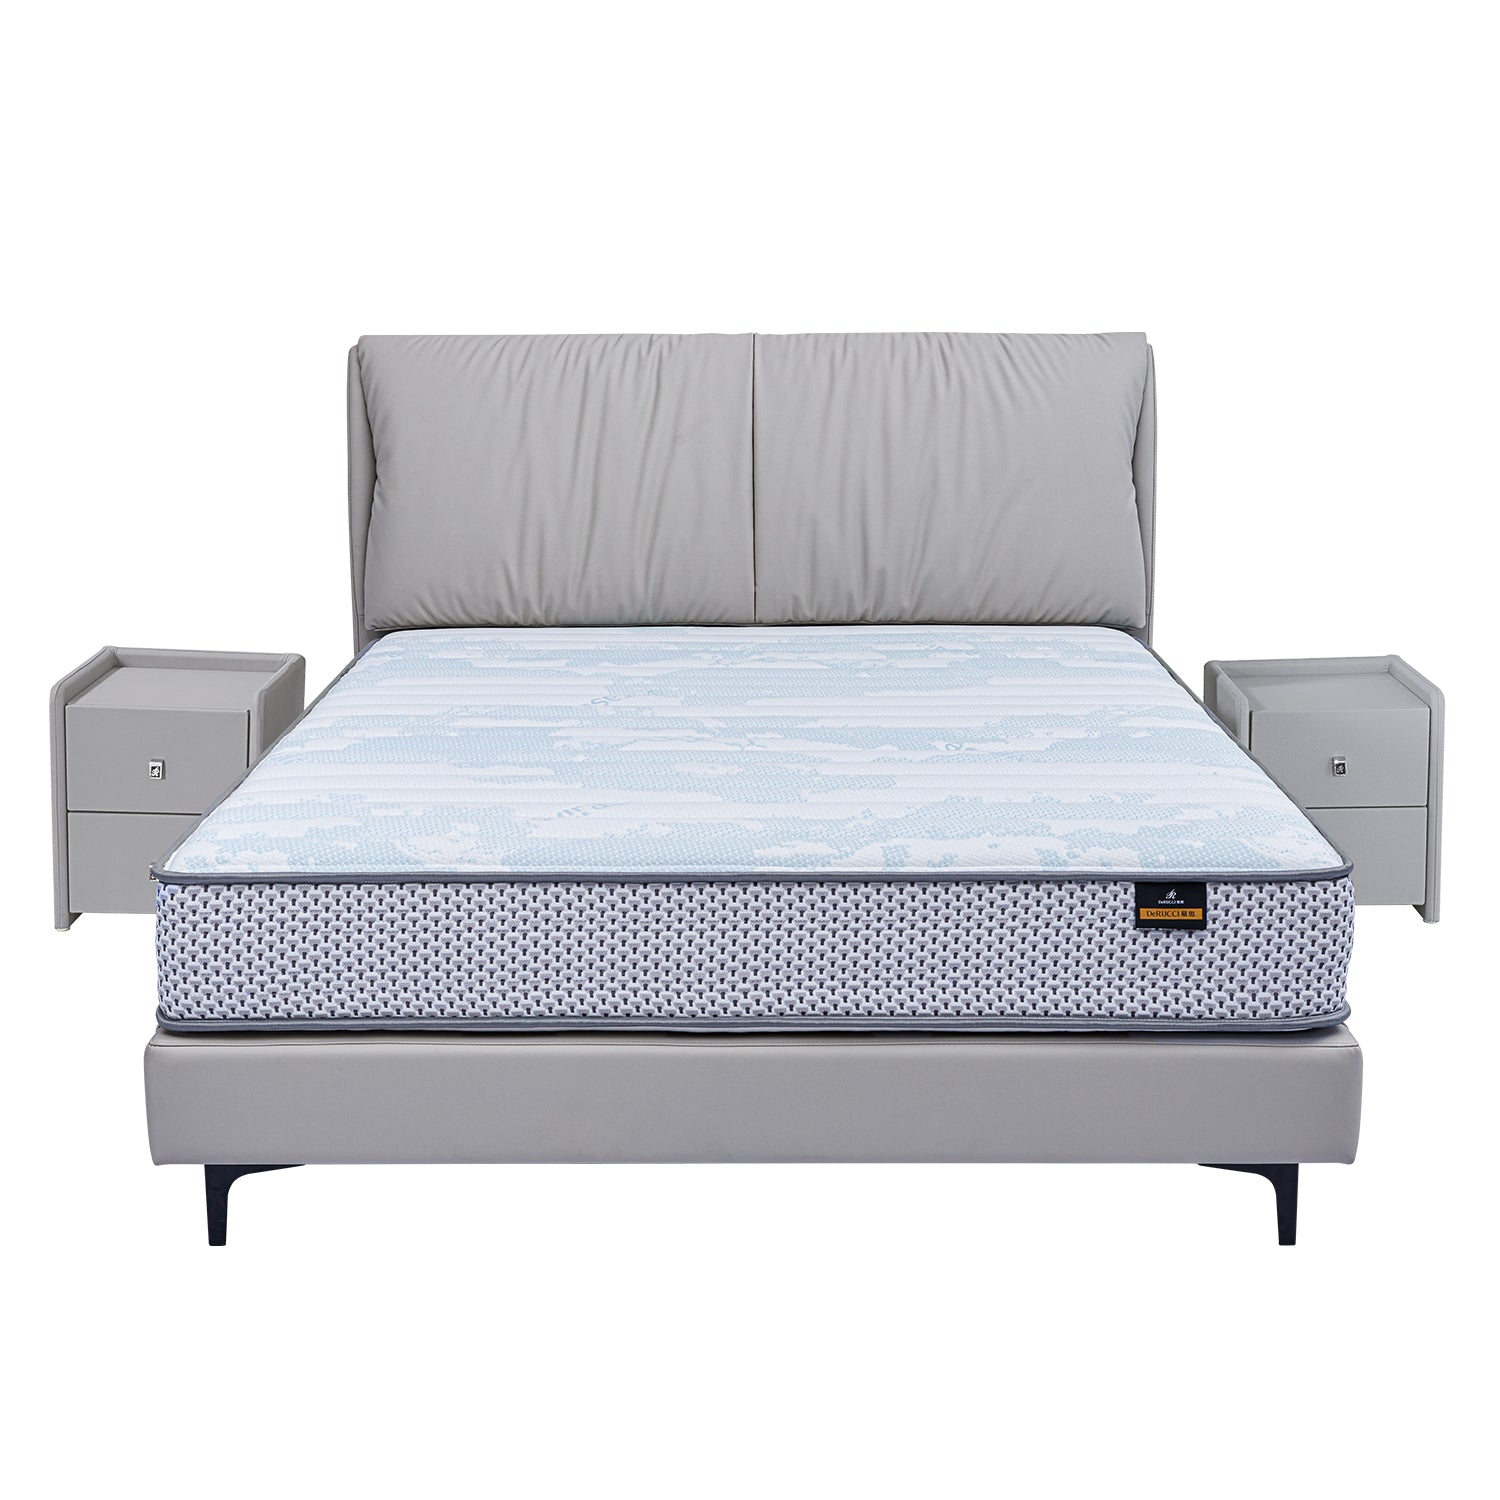 DeRUCCI Bed Frame BOC1 - 012 with a grey upholstered headboard, matching base, and two grey bedside tables for a modern bedroom look